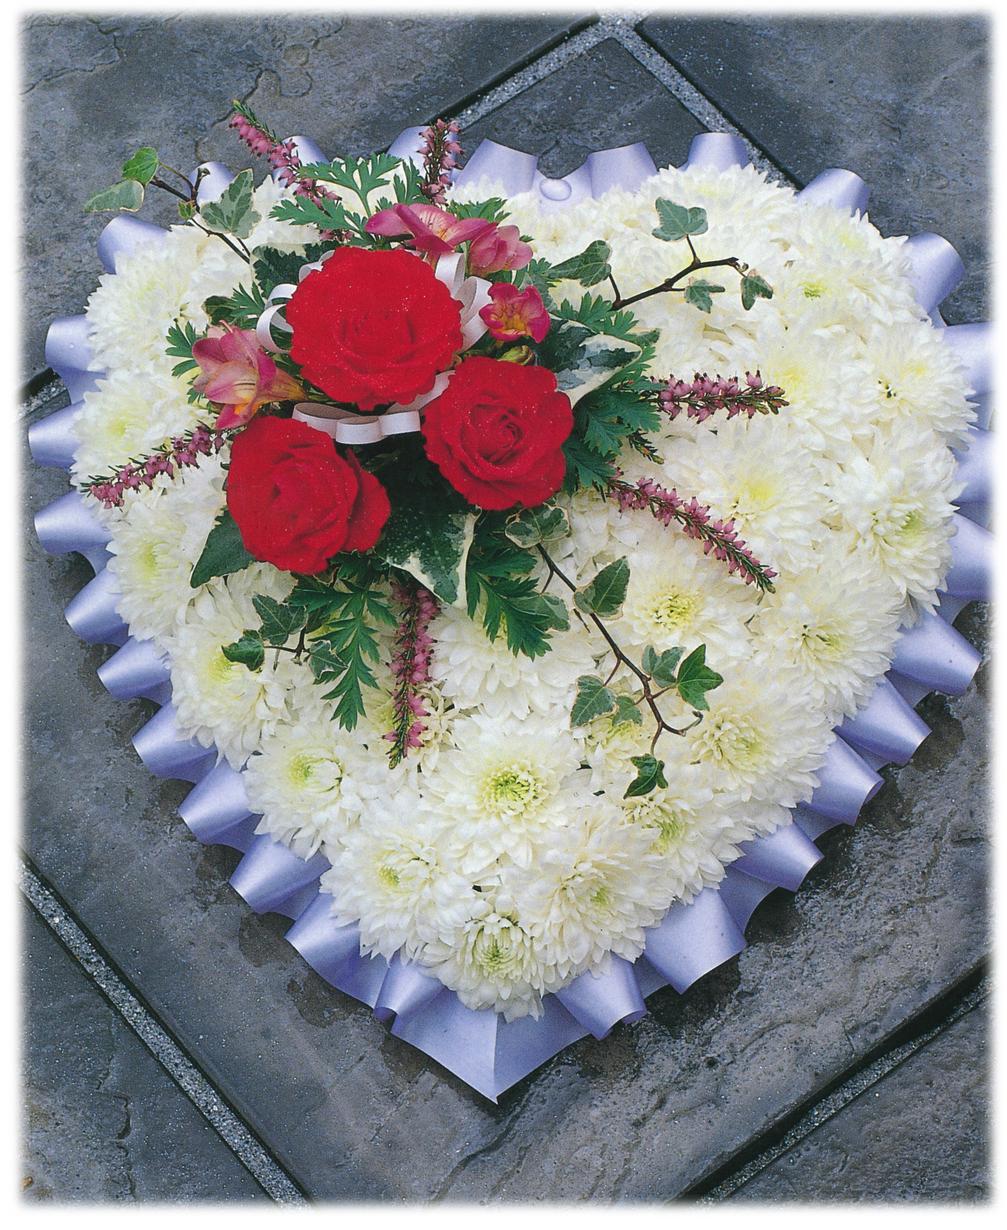 Floral Tributes | Funeral Directors in Portsmouth and Havant gallery image 19